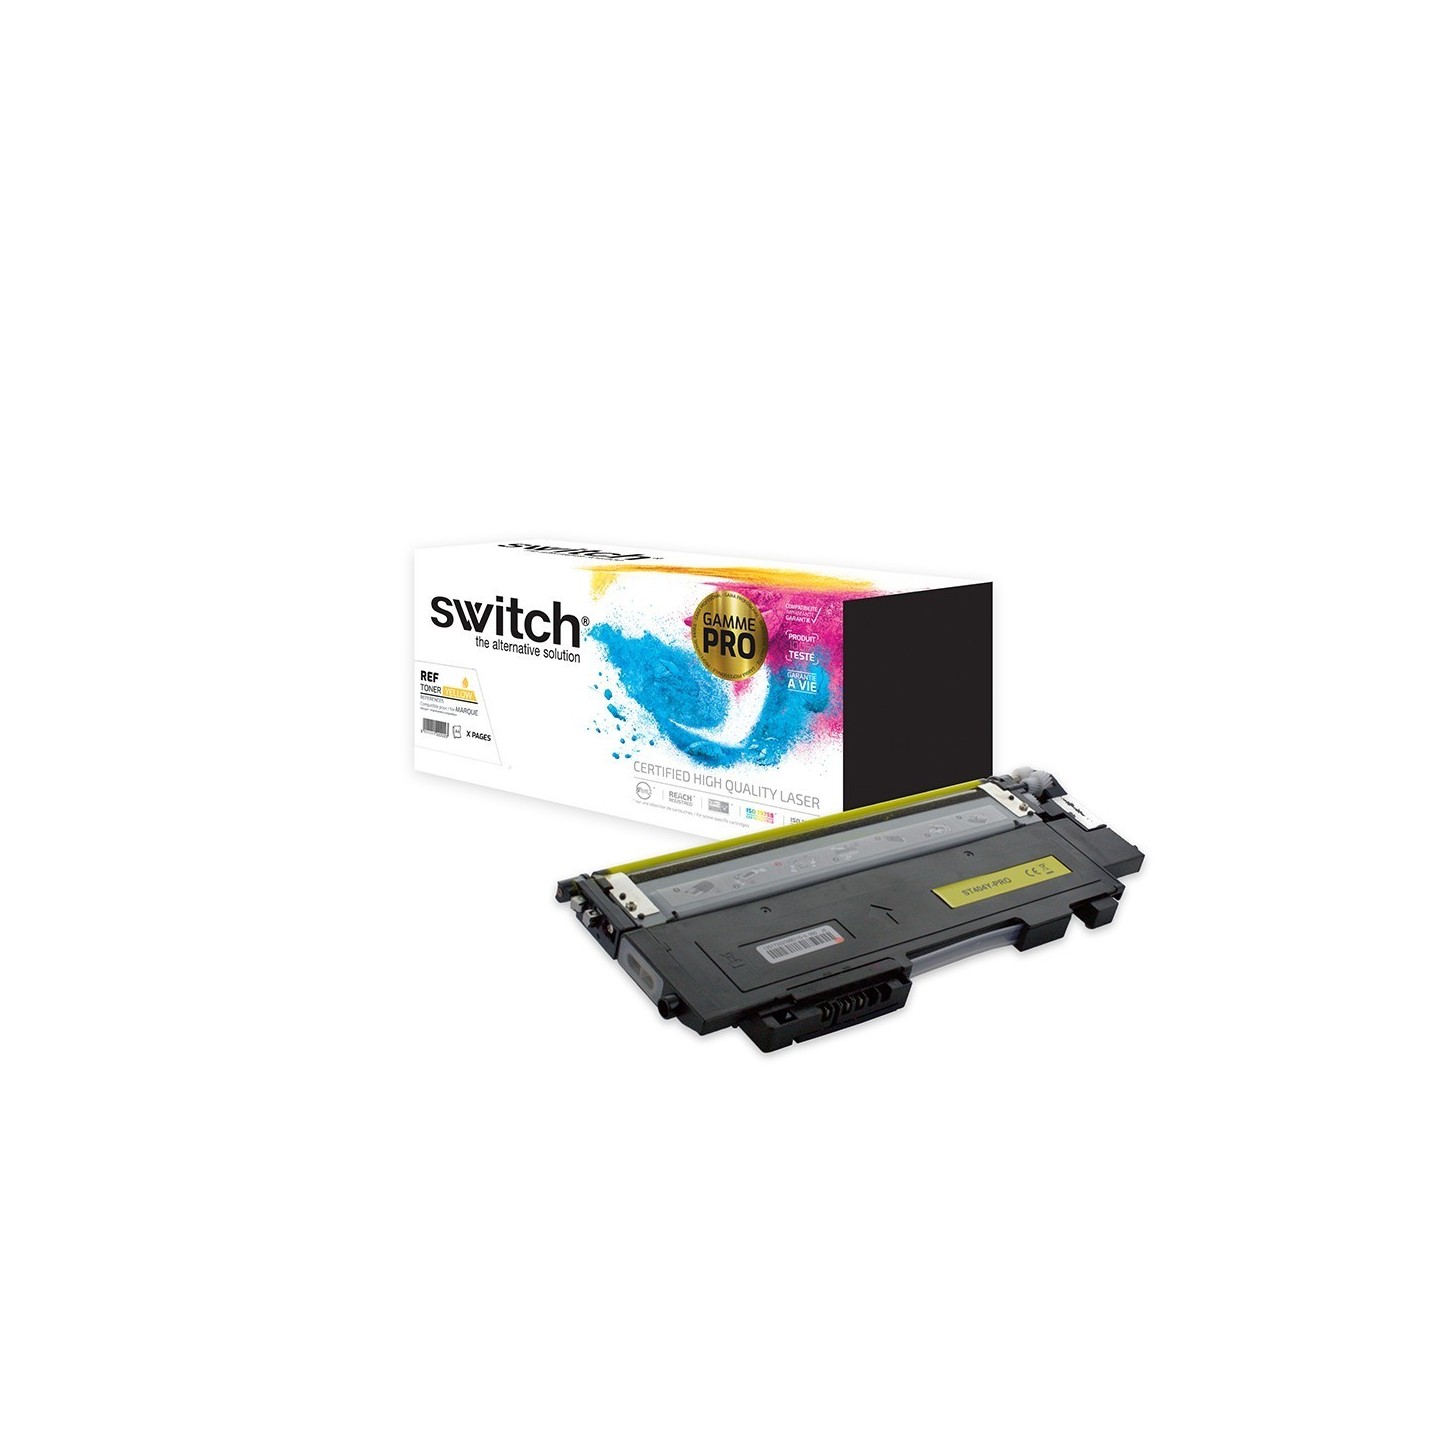 SWITCH Toner 'Gamme PRO' compatible avec CLTY404SELS - Jaune